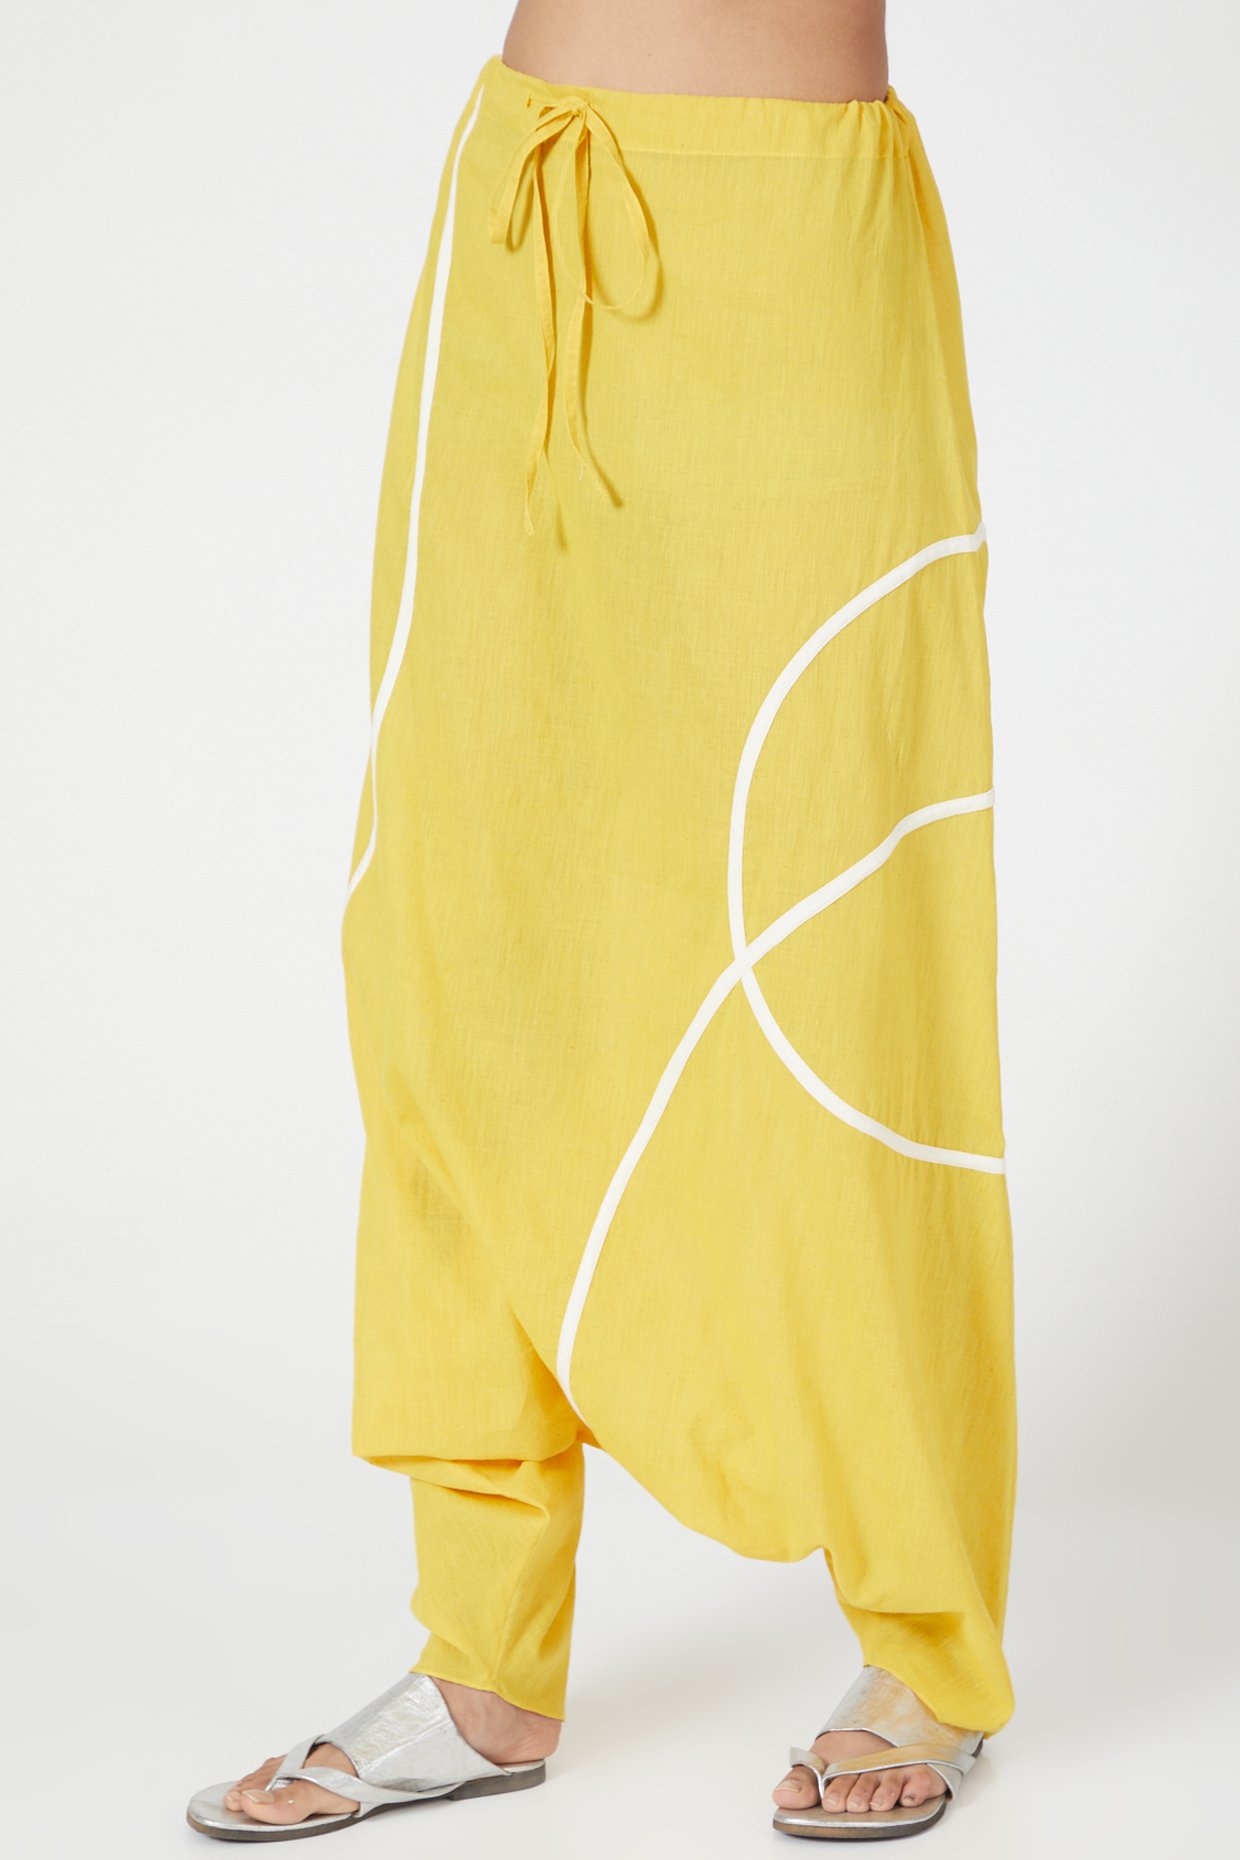 Buy online Yellow Cotton Harem Pants from bottom wear for Women by Desi  Weavess for 829 at 40 off  2023 Limeroadcom